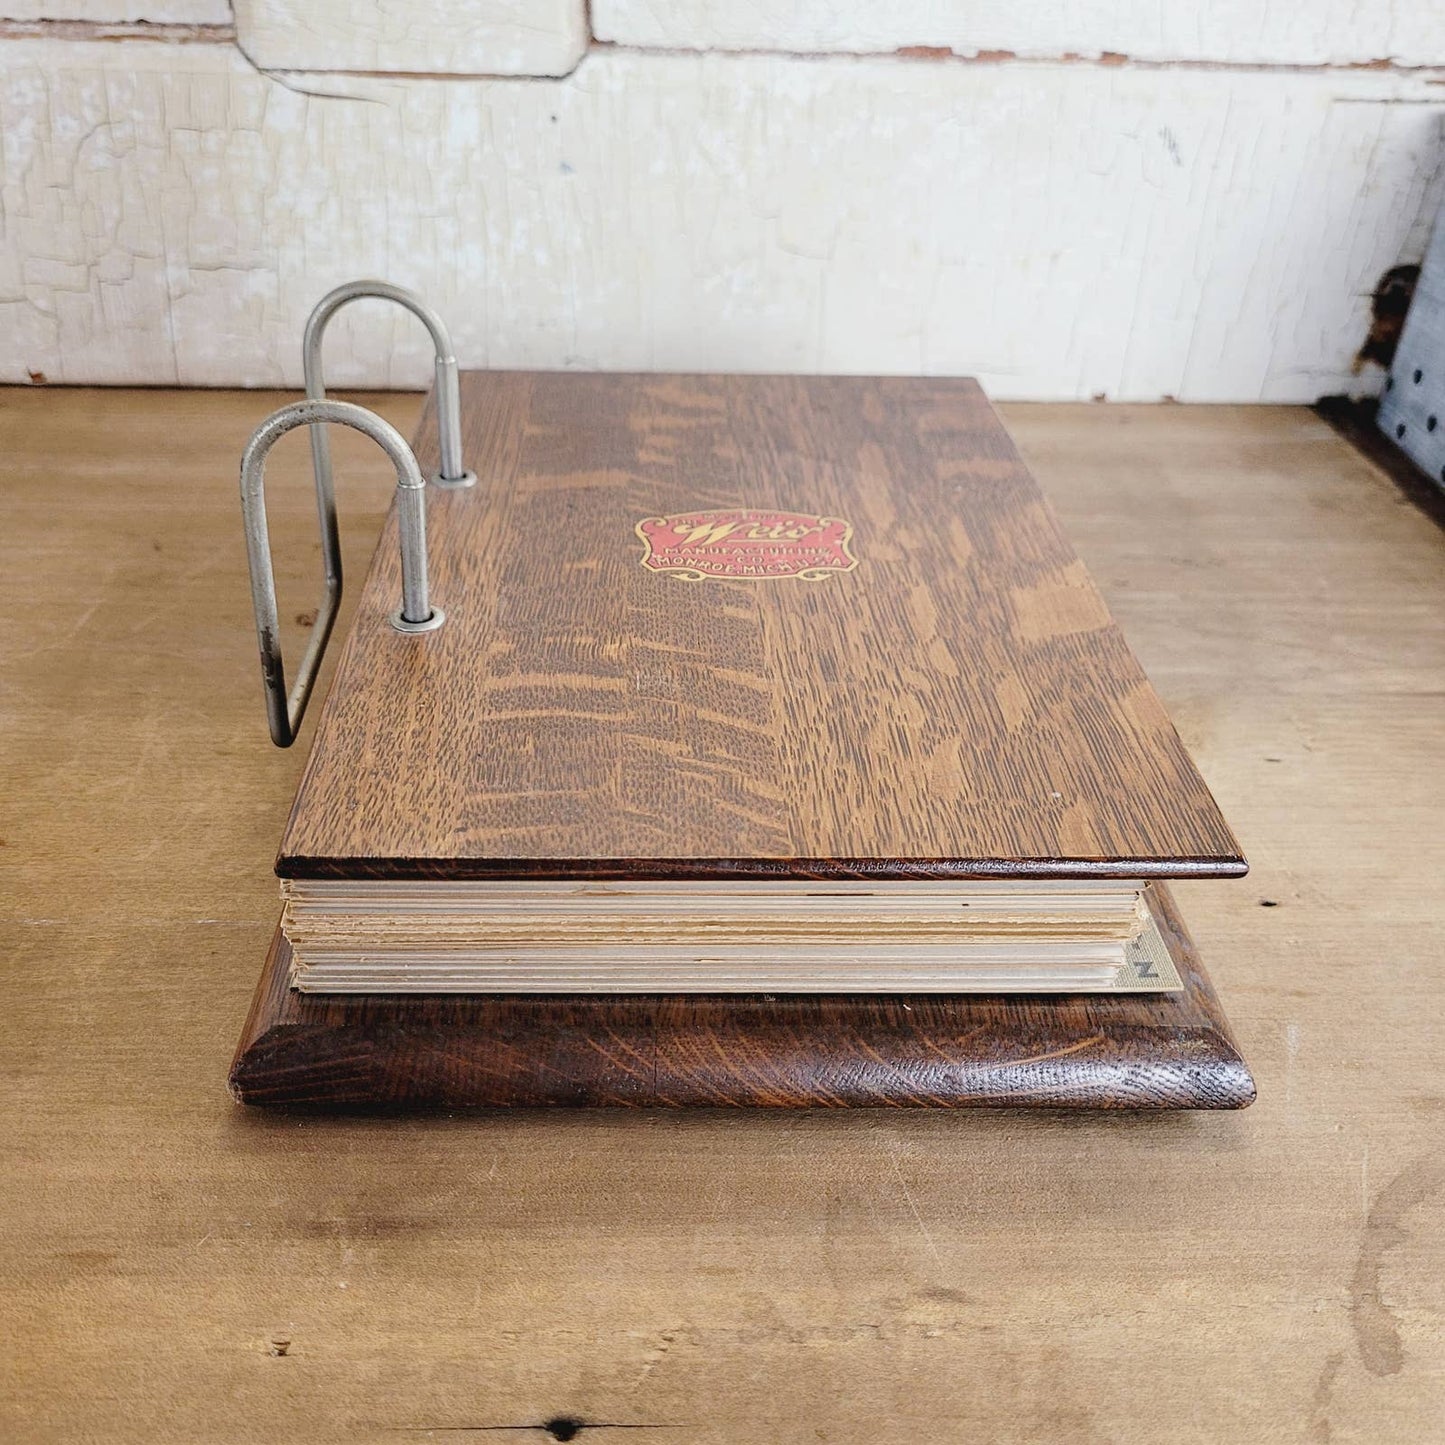 1920's Weis Manufacturing Co. Monroe Michigan Wood Desktop Ledger Book w/Pages